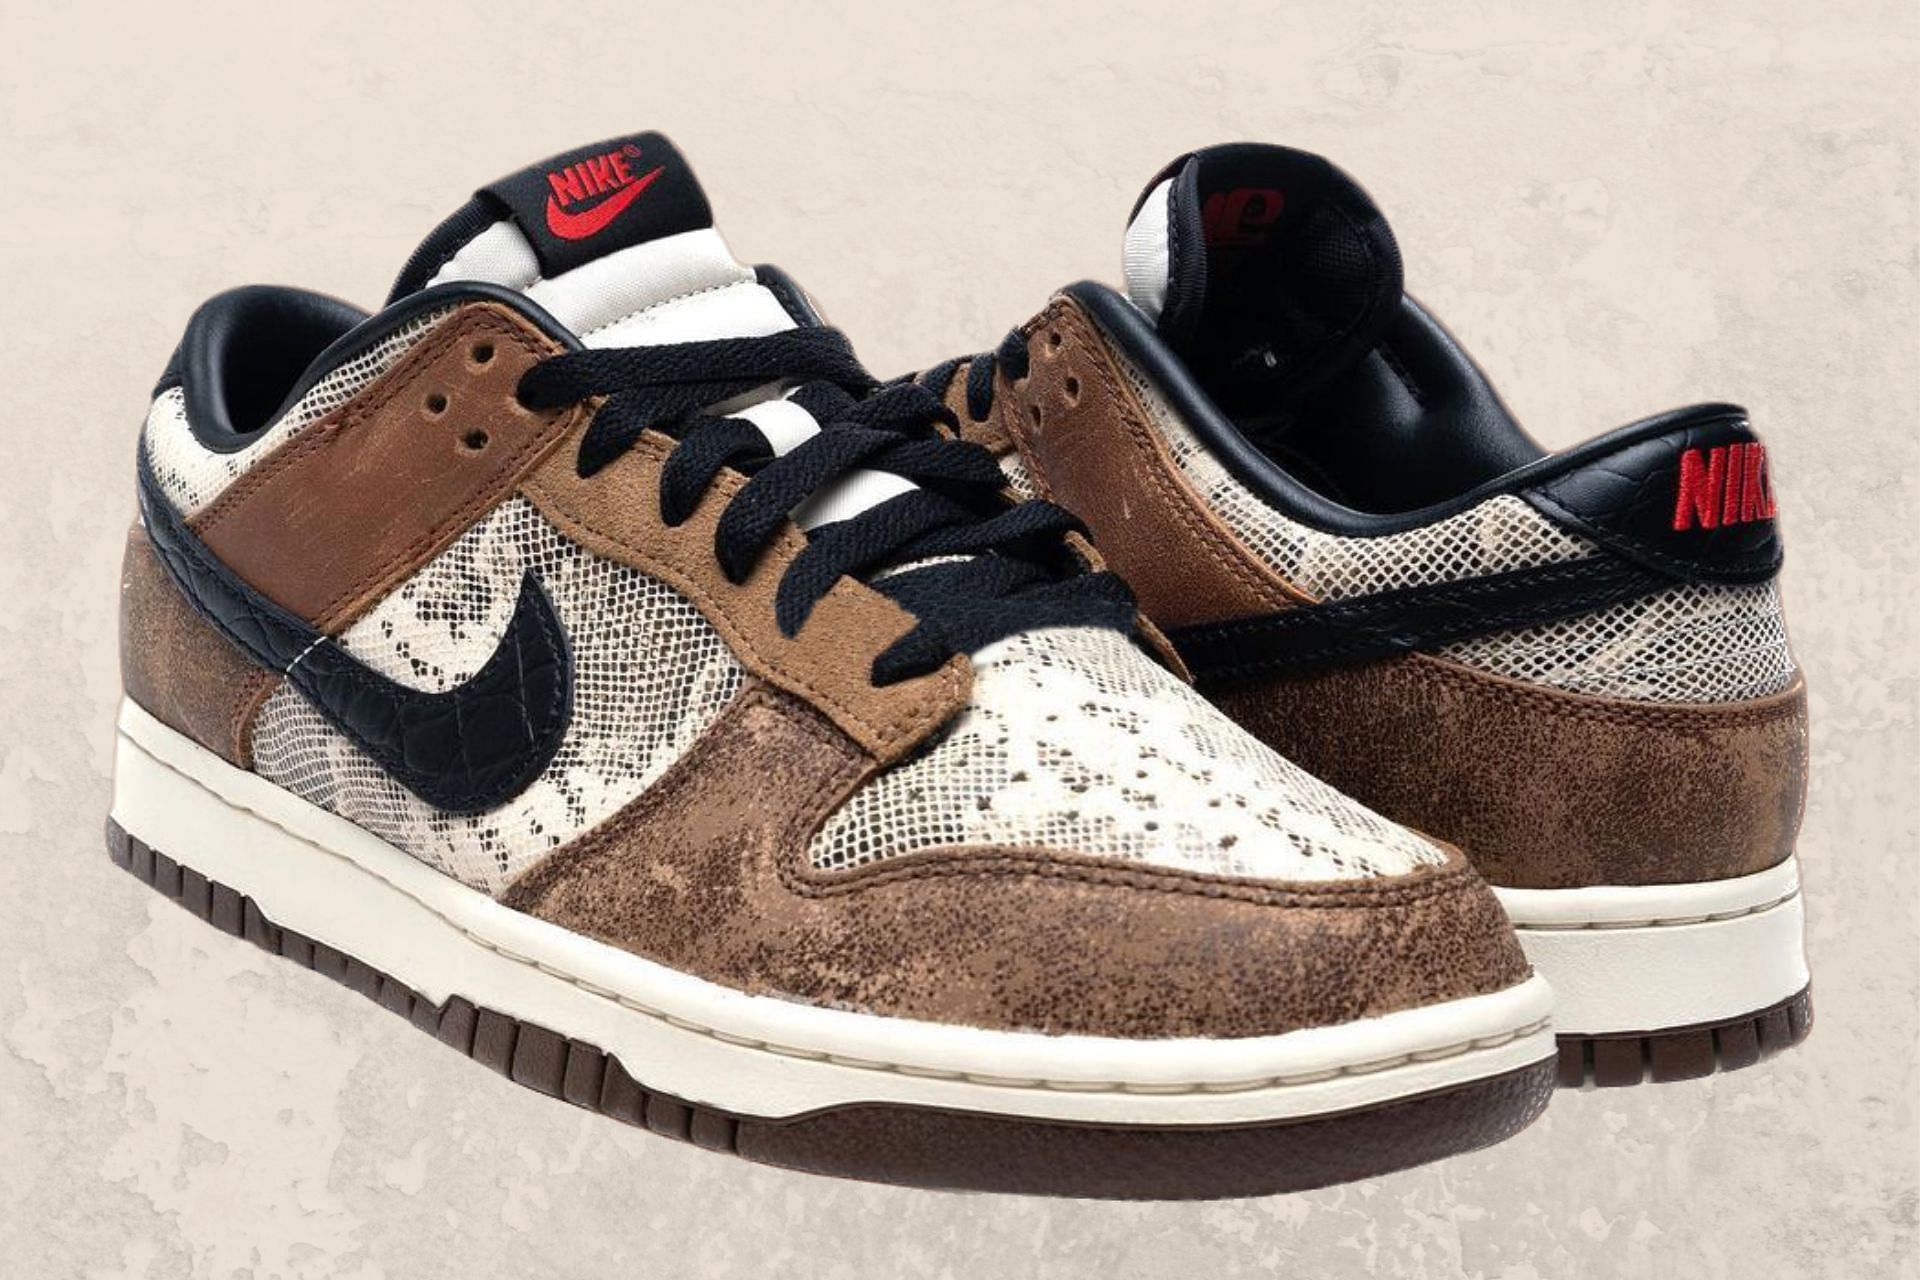 CO.JP Nike Dunk Low CO.JP "Brown Snakeskin" shoes Where to buy, price